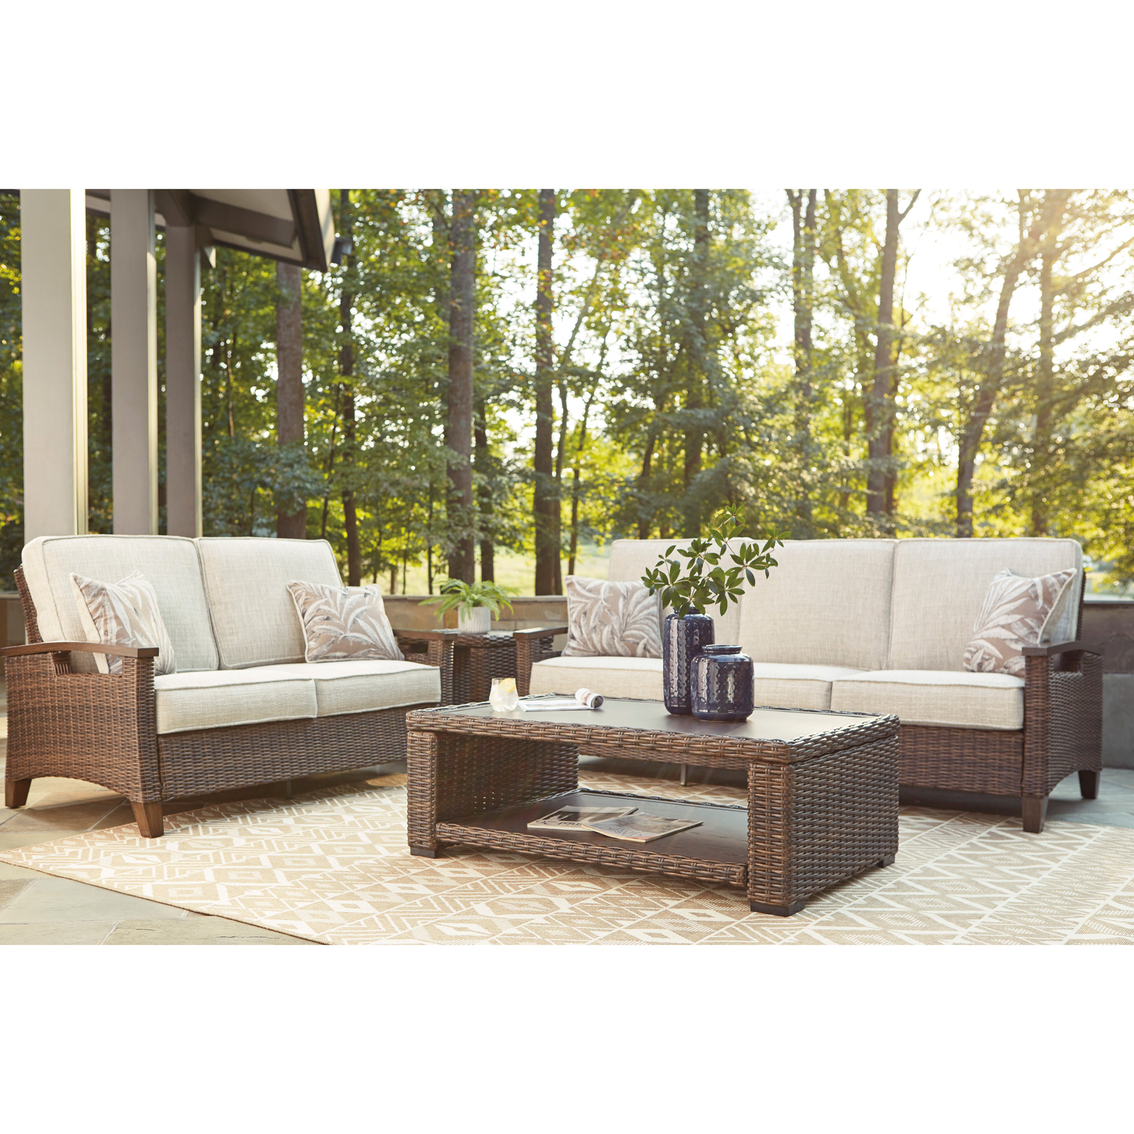 Signature Design by Ashley Paradise Trail 4 pc. Outdoor Seating Set - Image 2 of 10